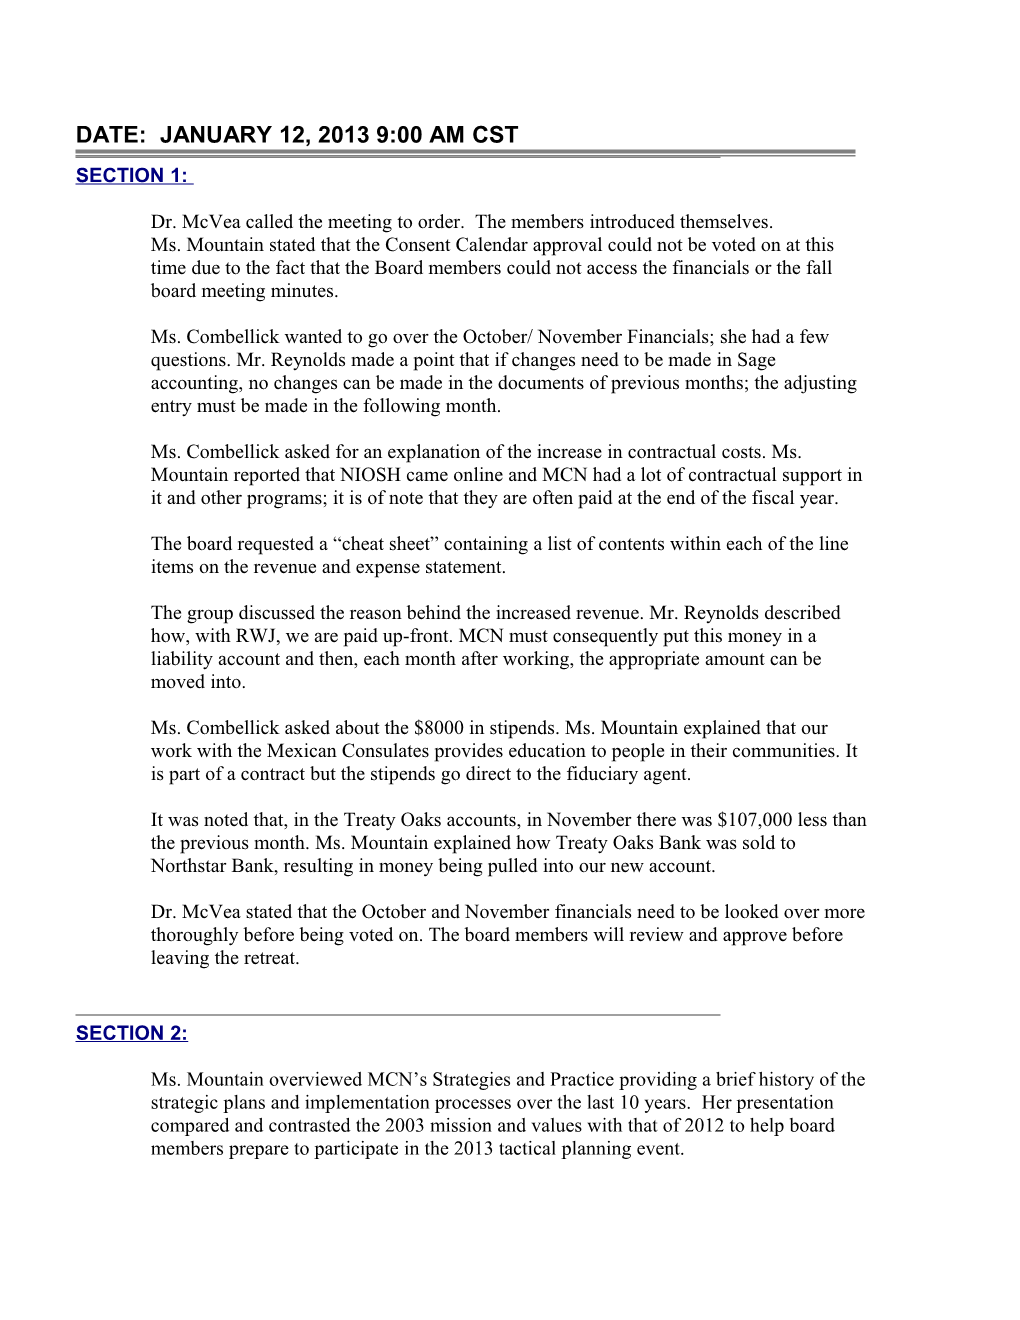 January 11, 2013 Board Meeting Minutes